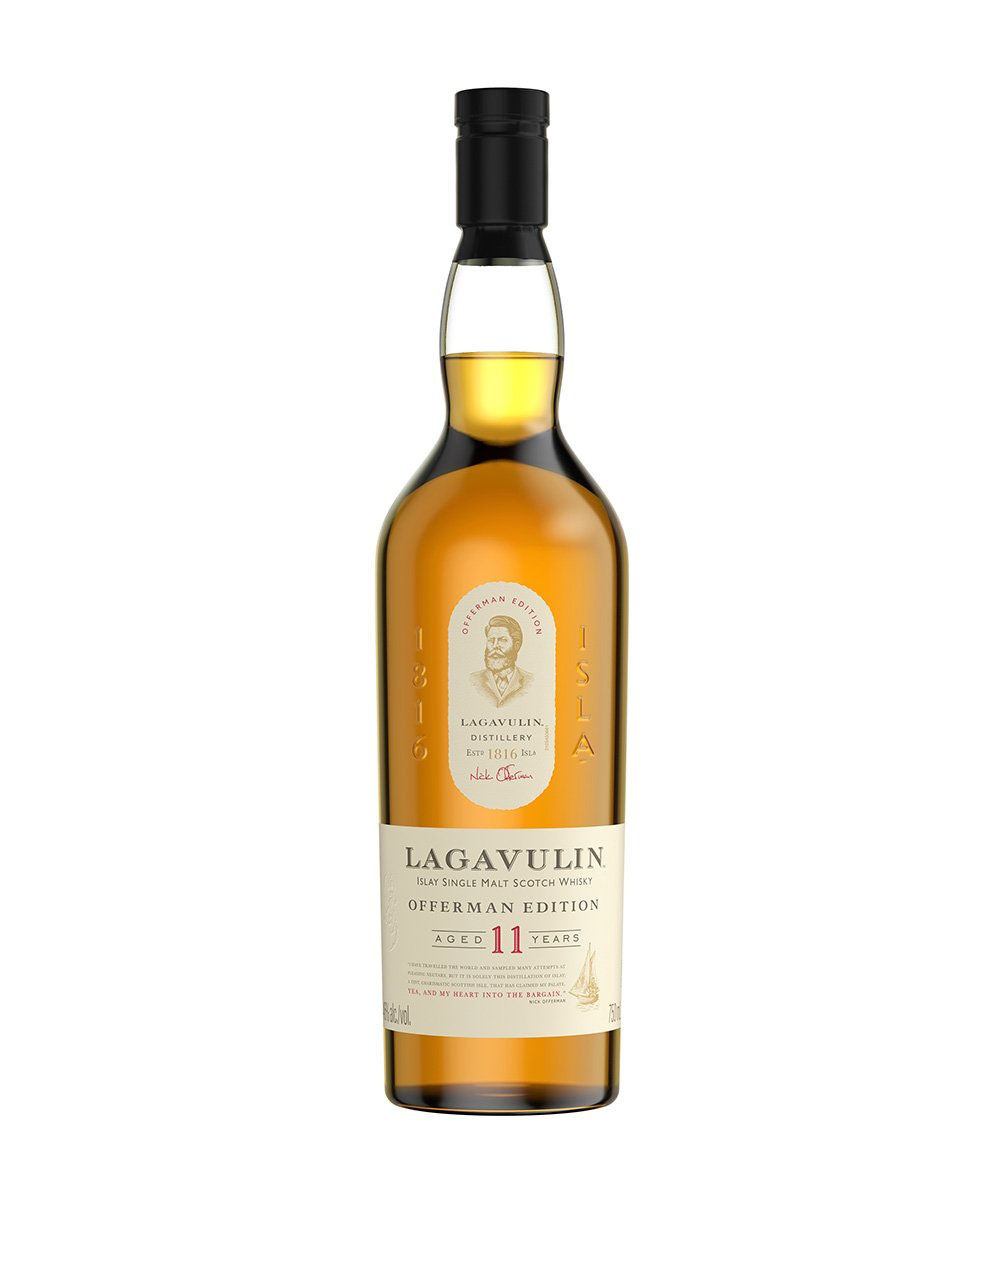 Lagavulin Offerman Edition 11 Year Old Scotch Whisky